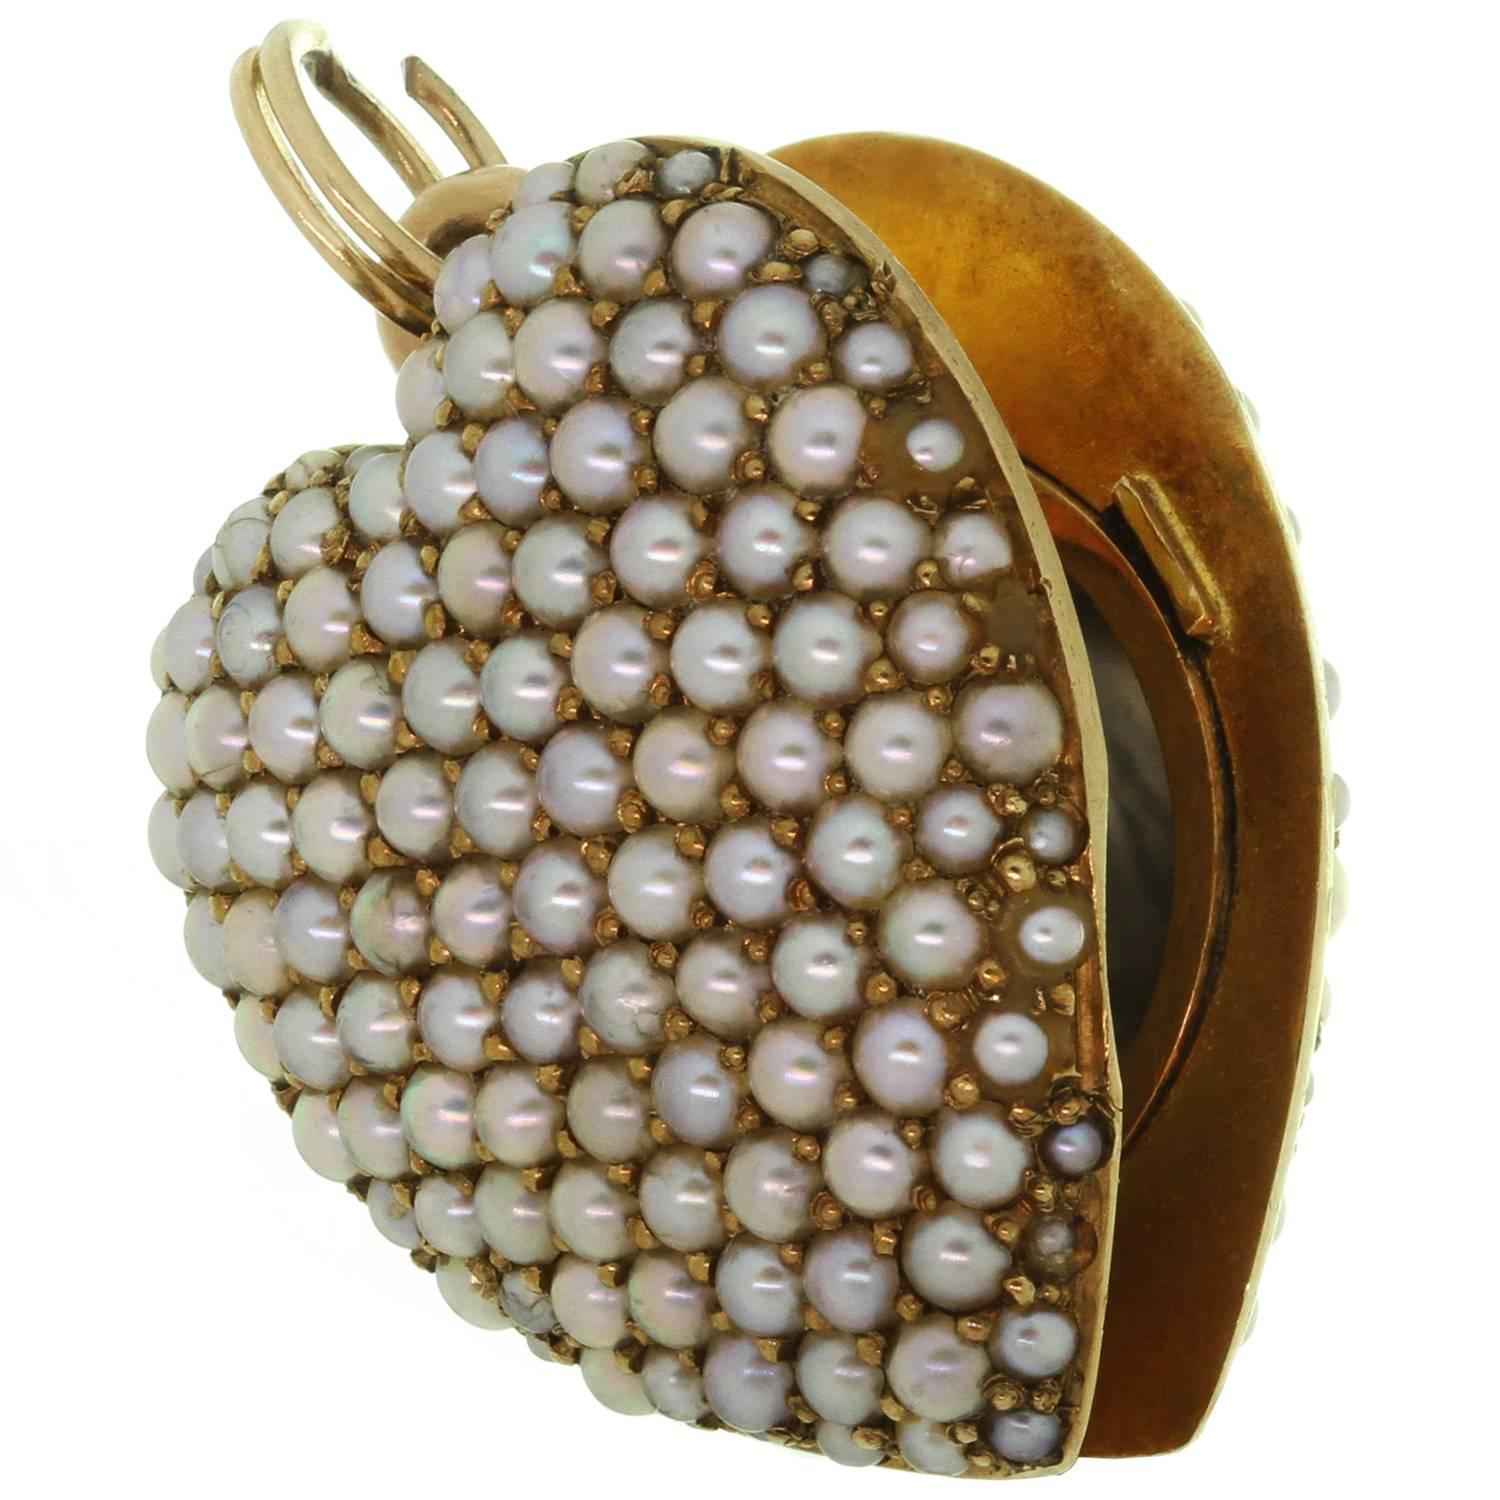 This wonderful 14 karat dimensional puffed heart shaped locket is not your ordinary locket as both sides are fully covered with beautiful individually bead-set little pave-set split seed pearls. The pearls are lustrous and the color is a mellow